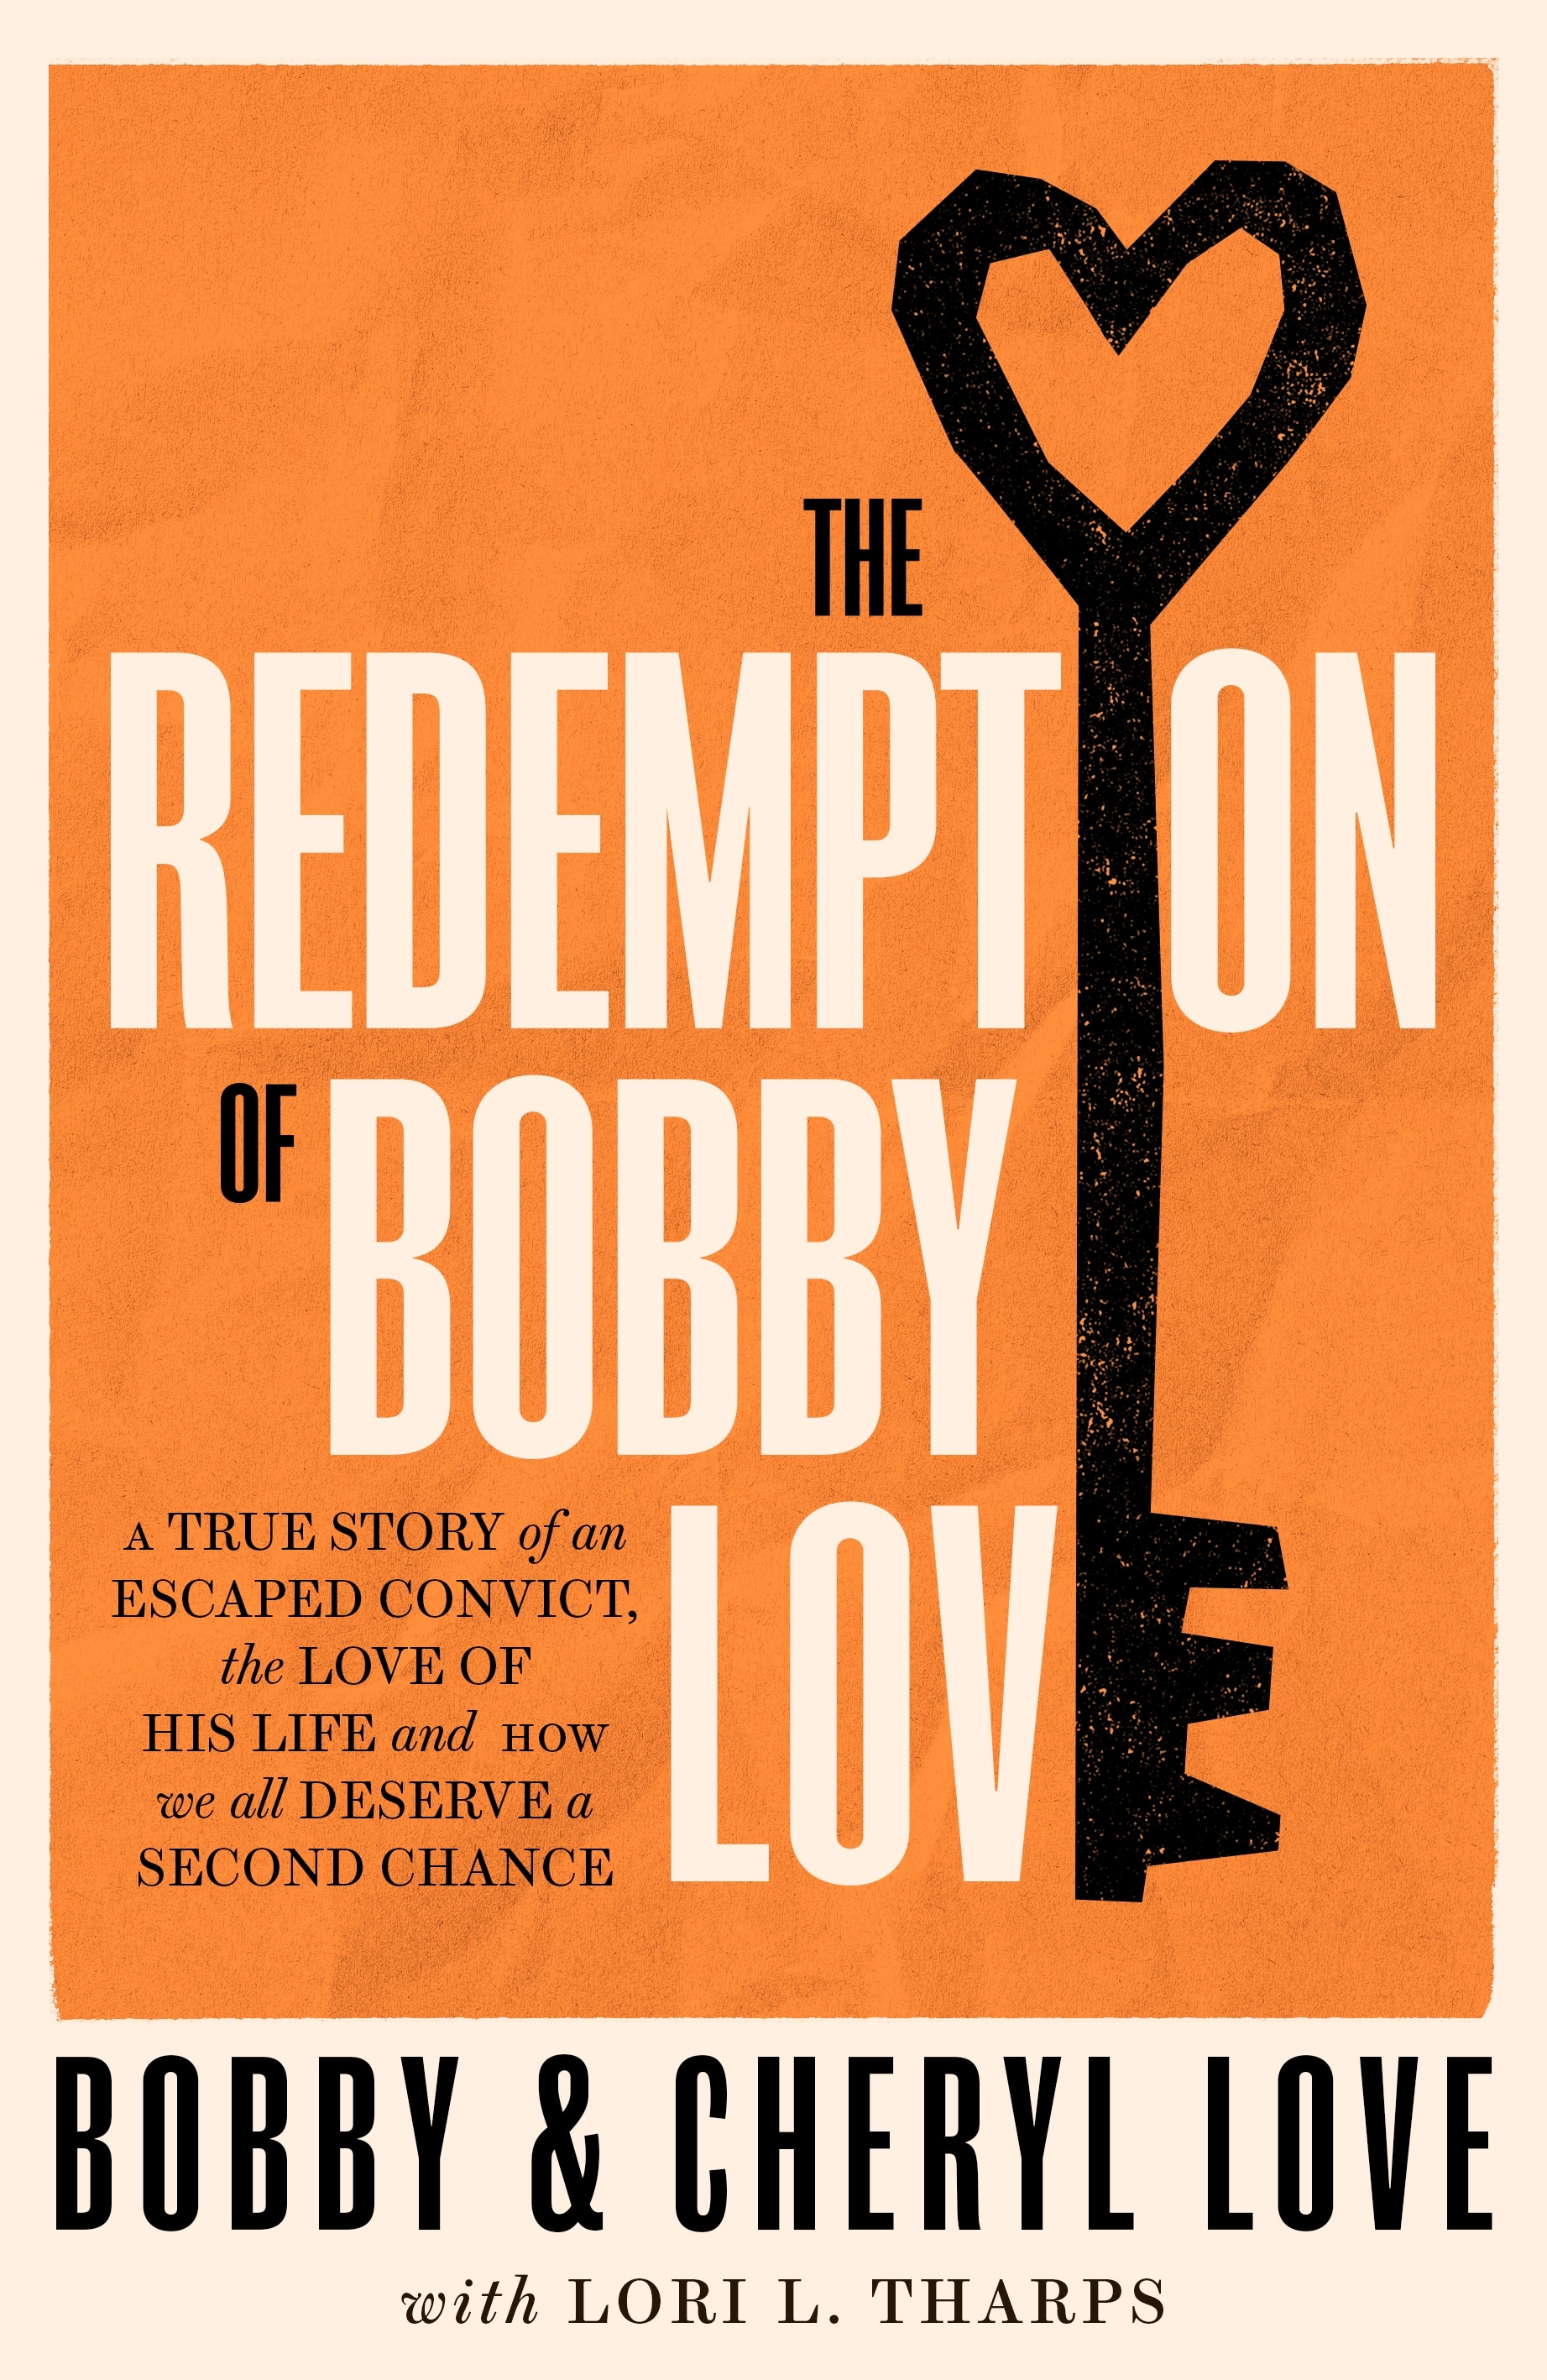 Book “The Redemption of Bobby Love” by Bobby Love, Cheryl Love — October 7, 2021